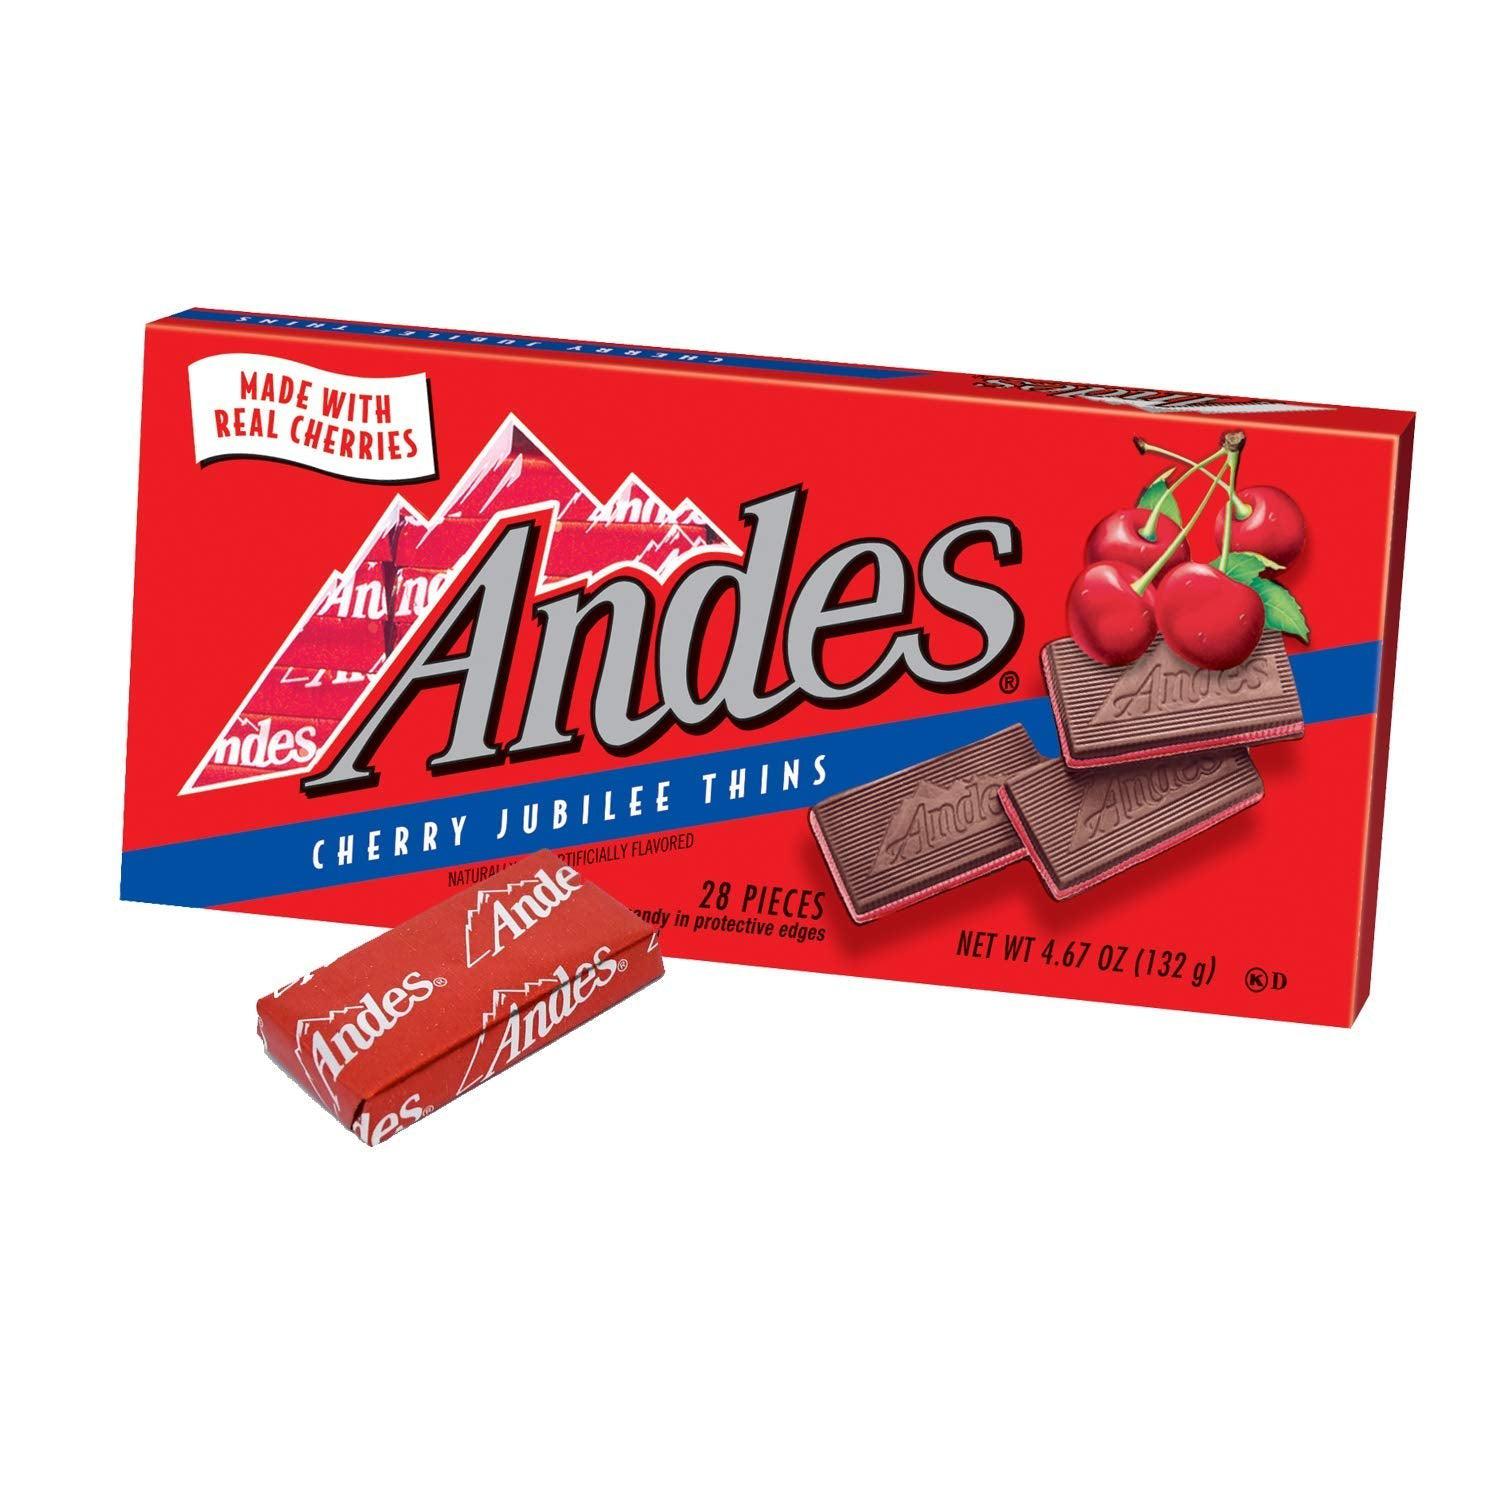 Charms-Andes Cherry Jubilee Thins 4.67 oz. Box-15340-Single-Legacy Toys